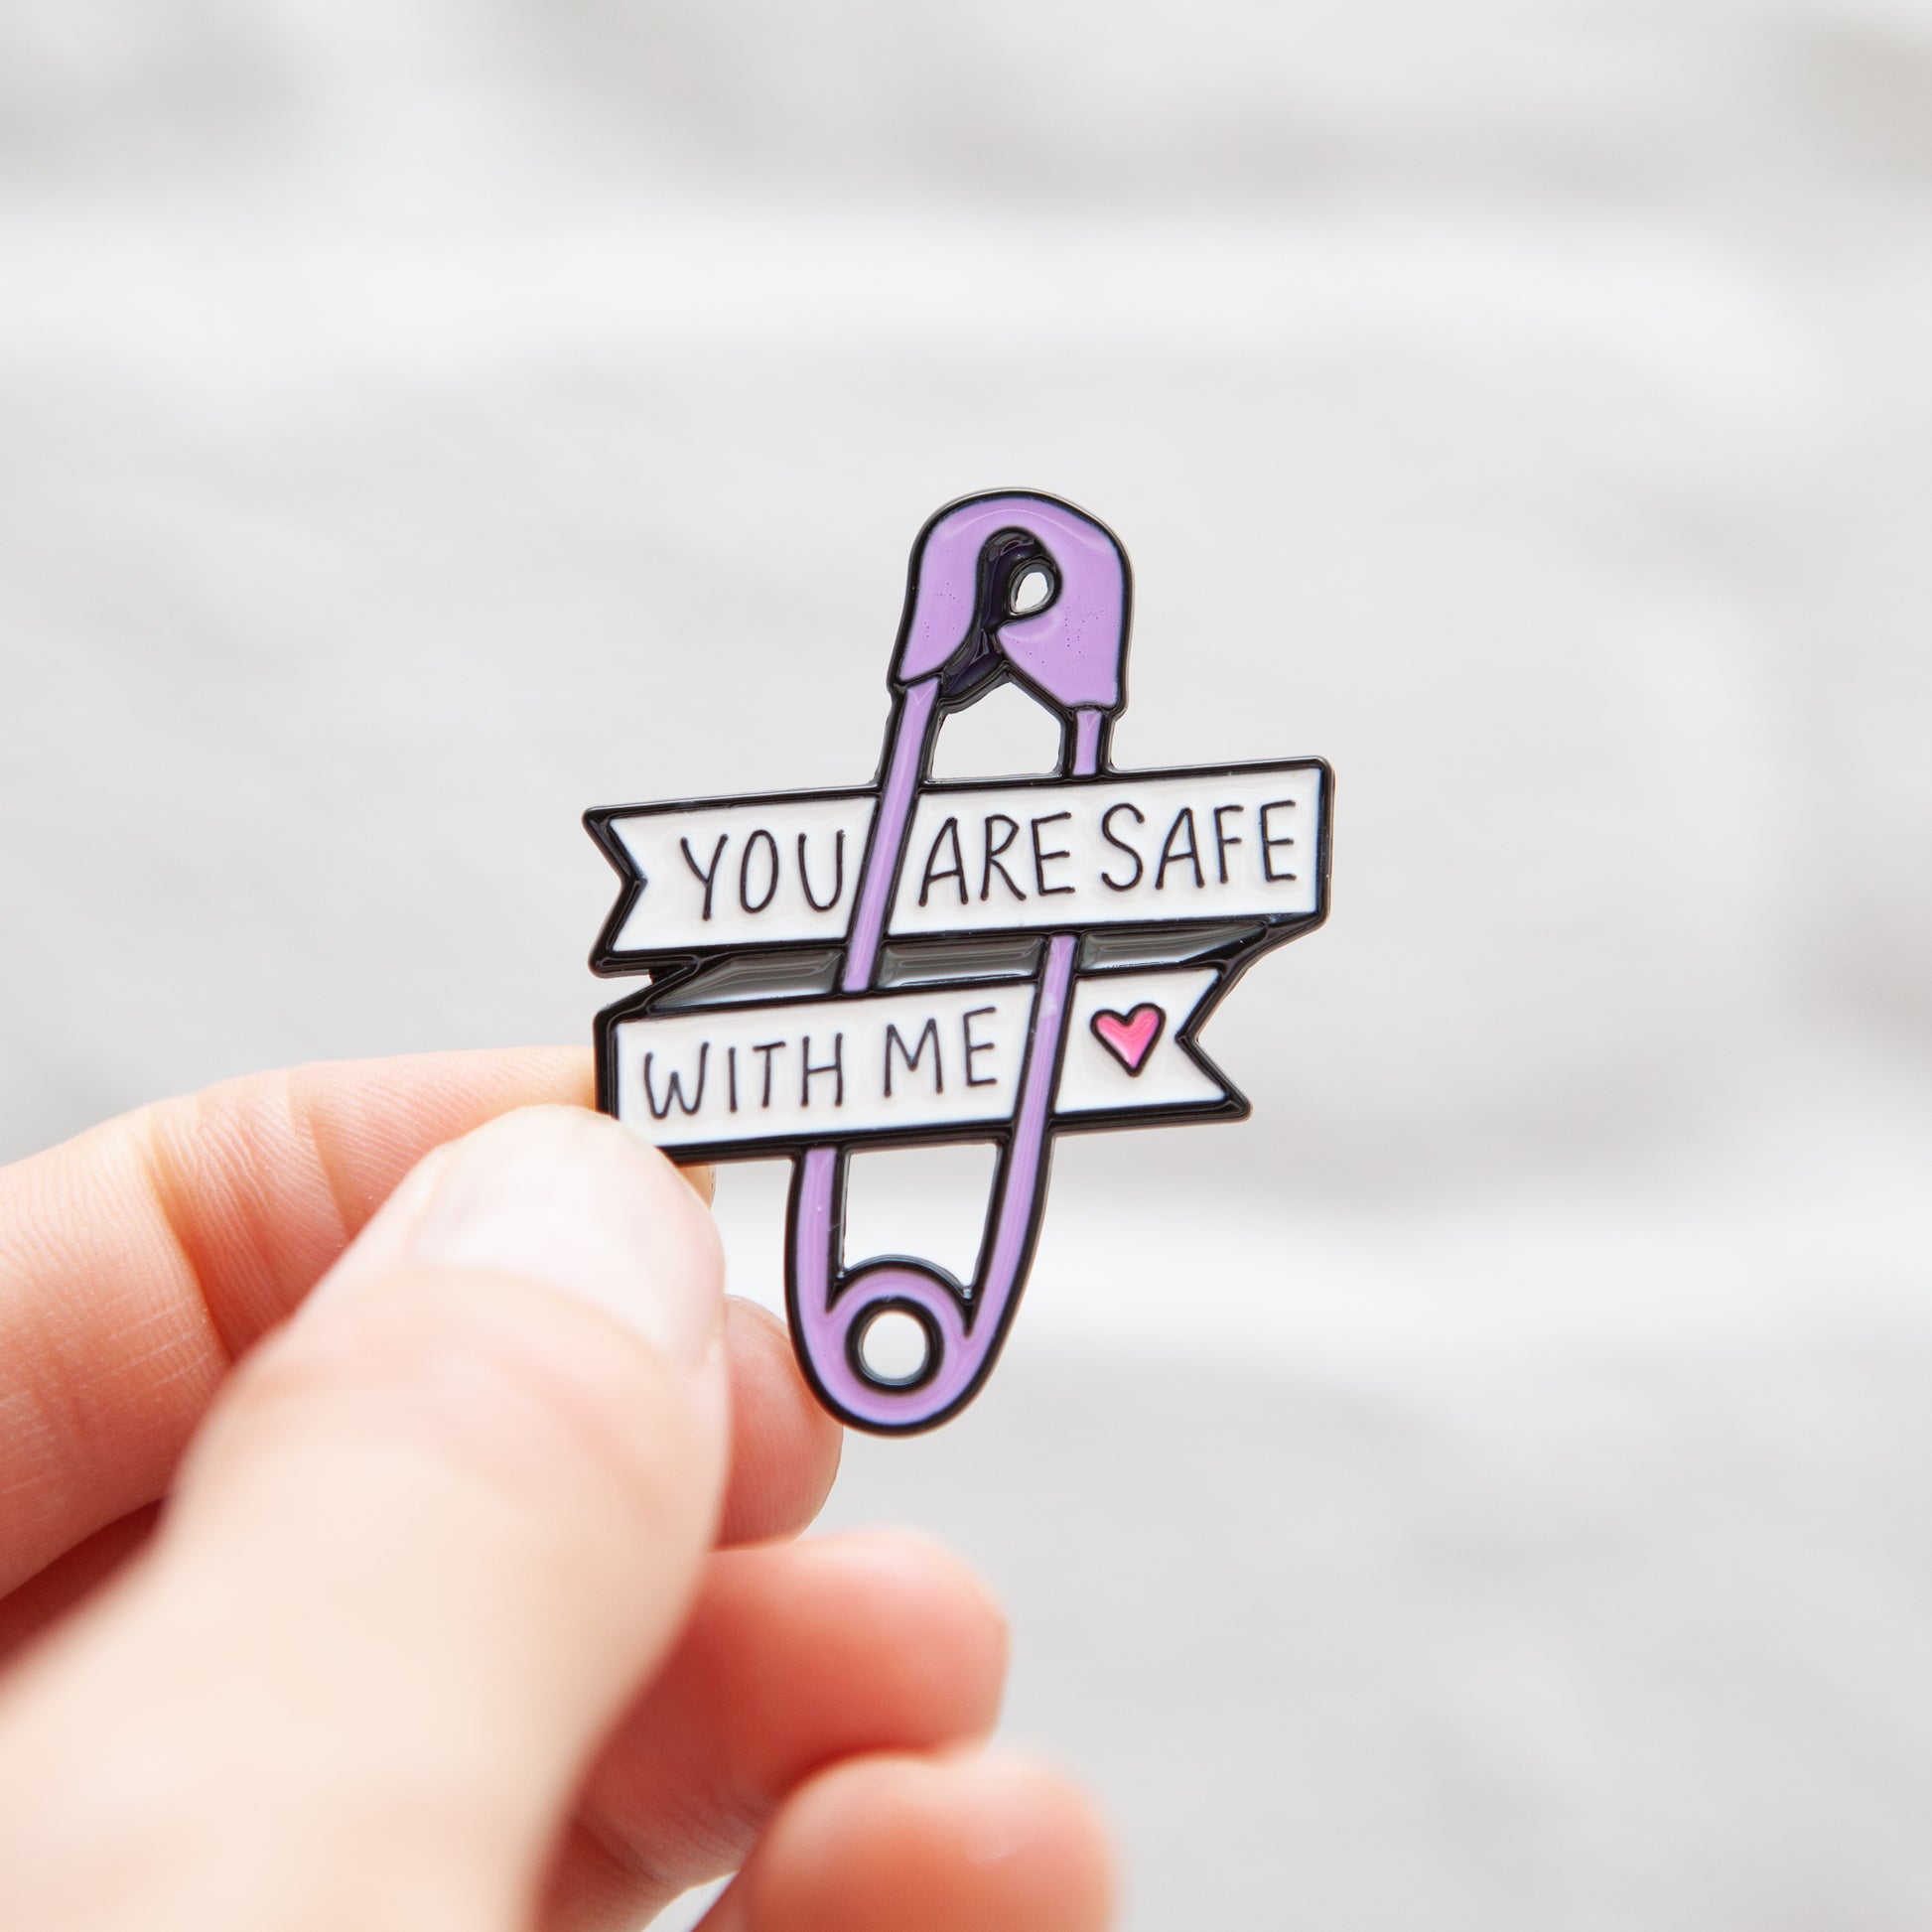 You Are Safe With Me "Safety Pin" Pin - Badgie